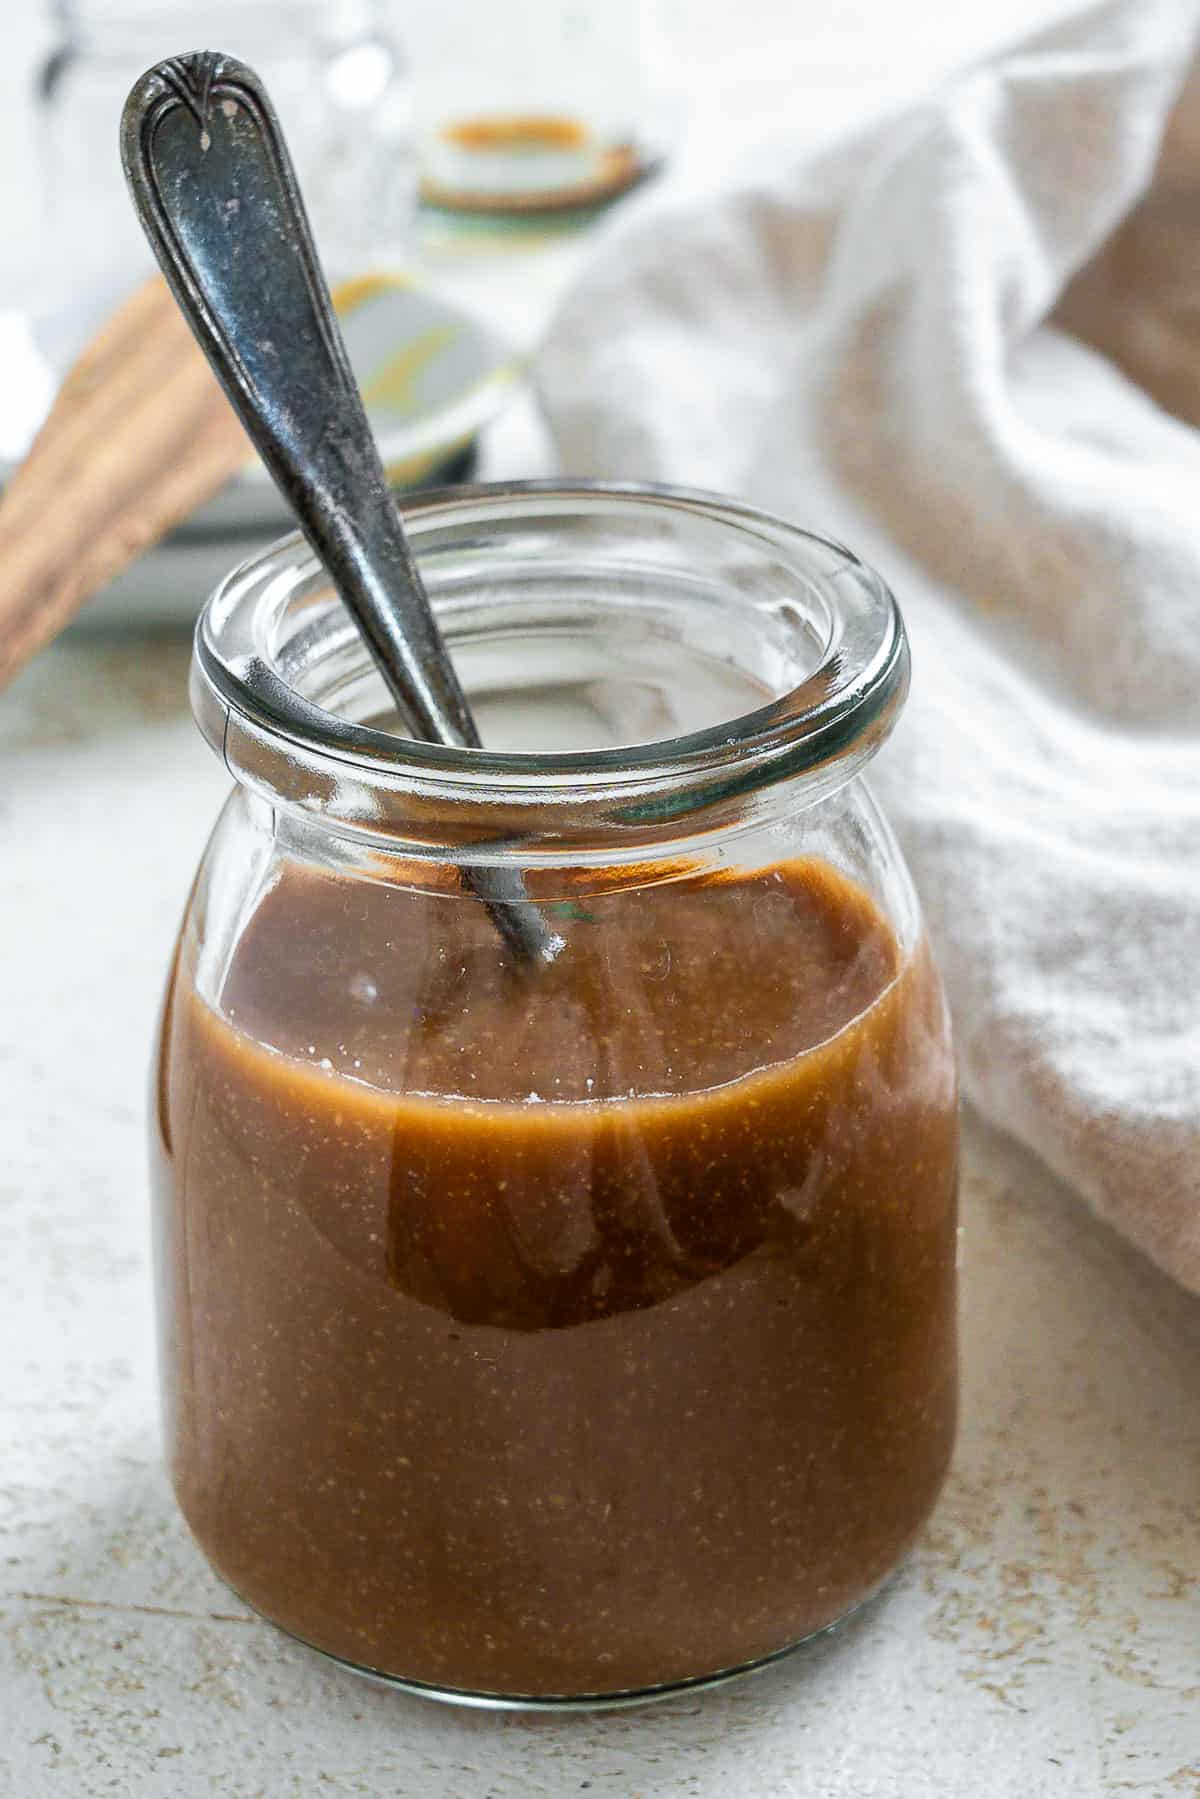 completed 2-Minute Oil Free Salad Dressing [Balsamic Vinaigrette] in a glass jar